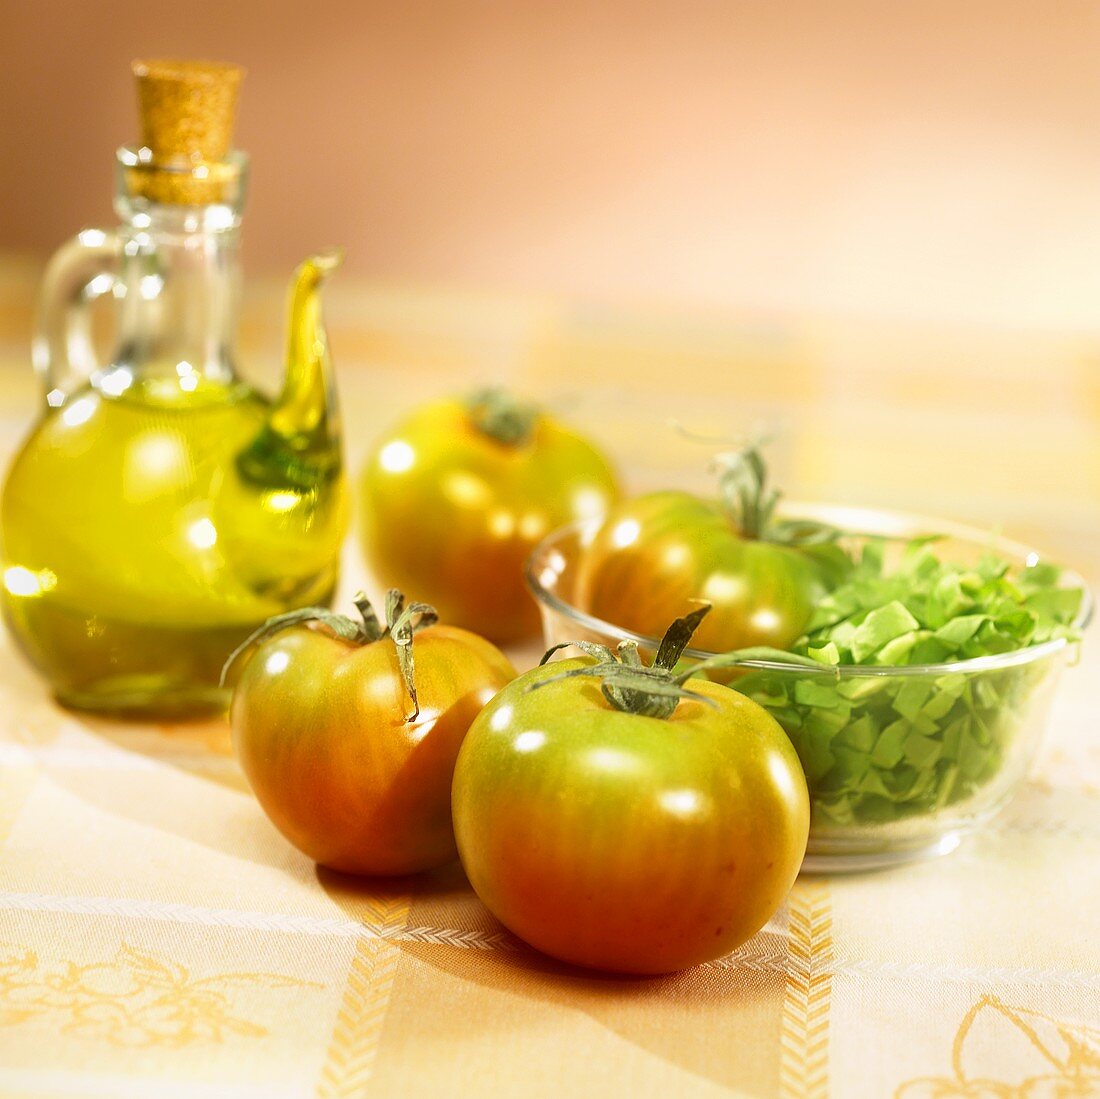 Tomatoes, lettuce and olive oil